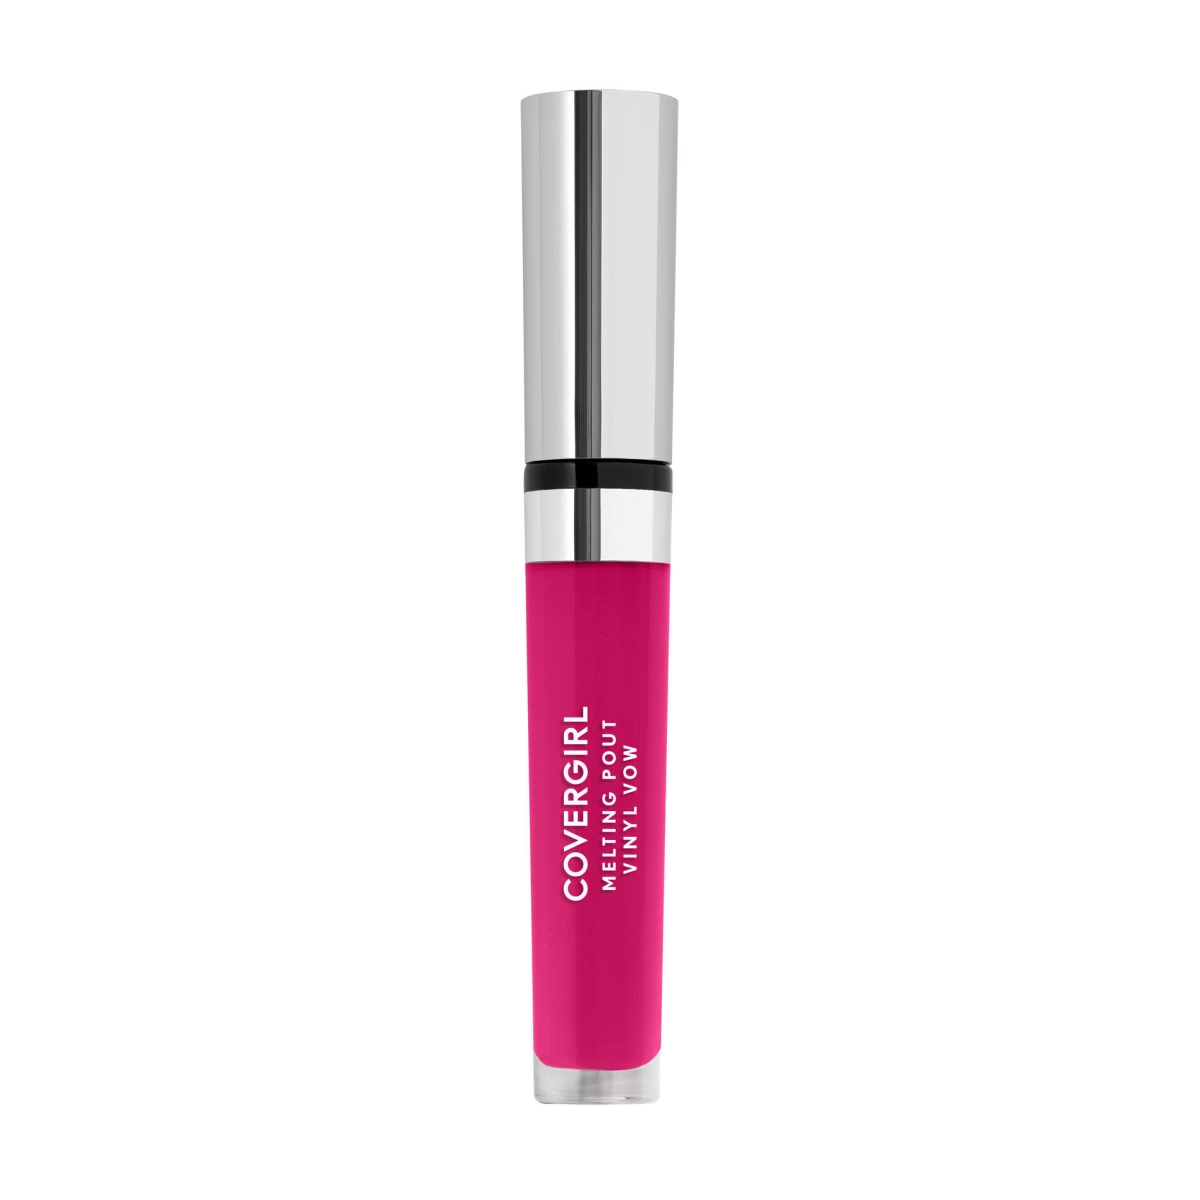 8291632 Melting Pout Vinyl Vow Liquid Lipstick, 220 Vibrant Thing - Pack Of 2